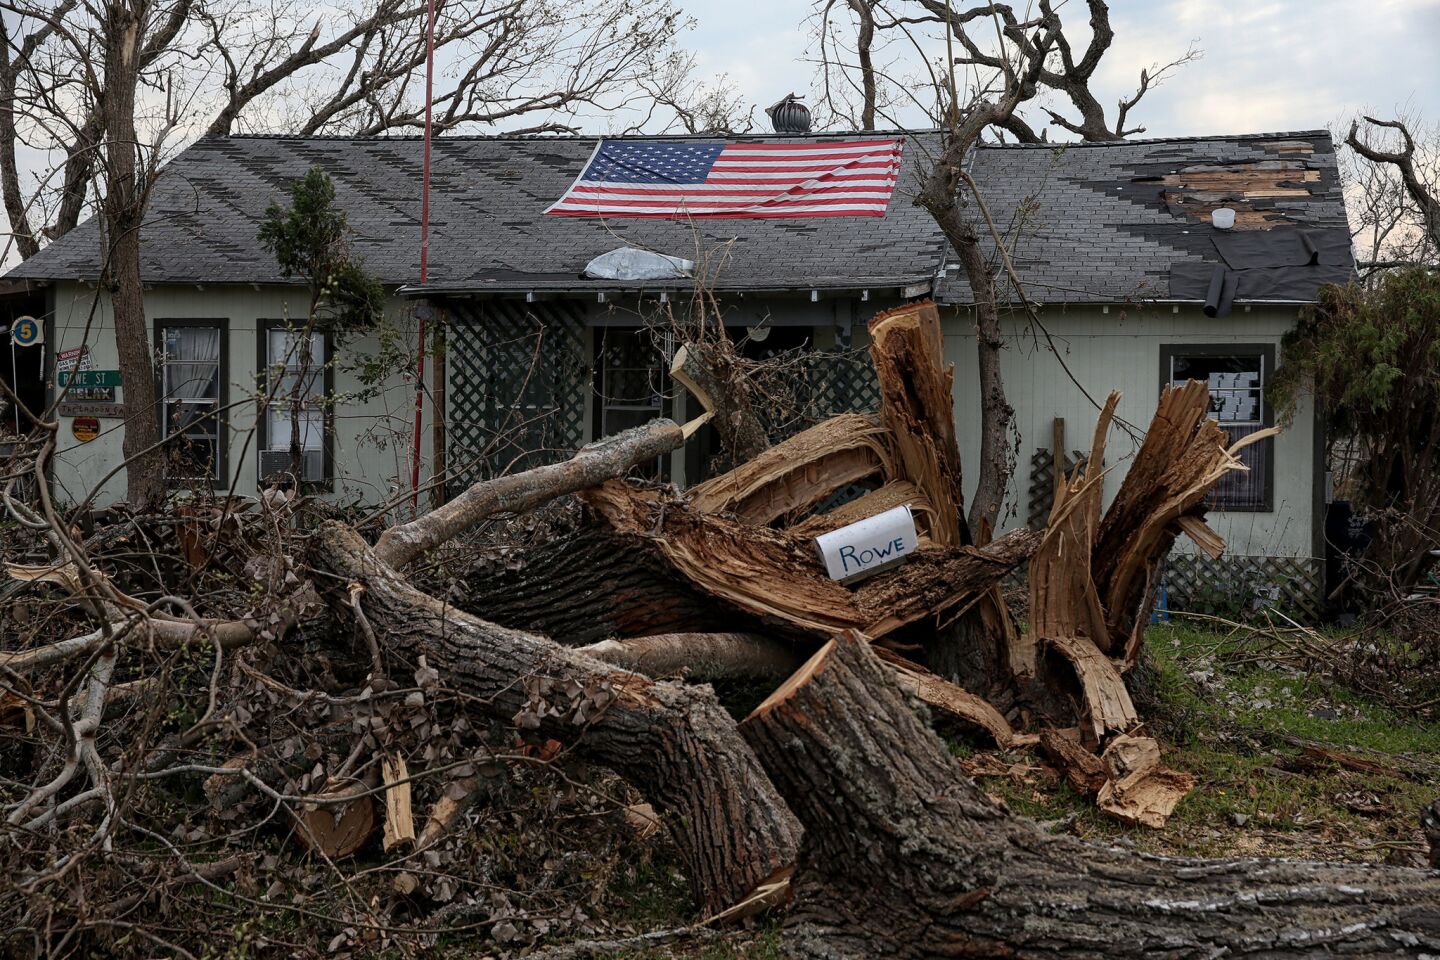 Despite heavy damage and no electricity, a homeowner displays his patriotism while clean up and recovery efforts continue in his devastated neighborhood of Rockport.